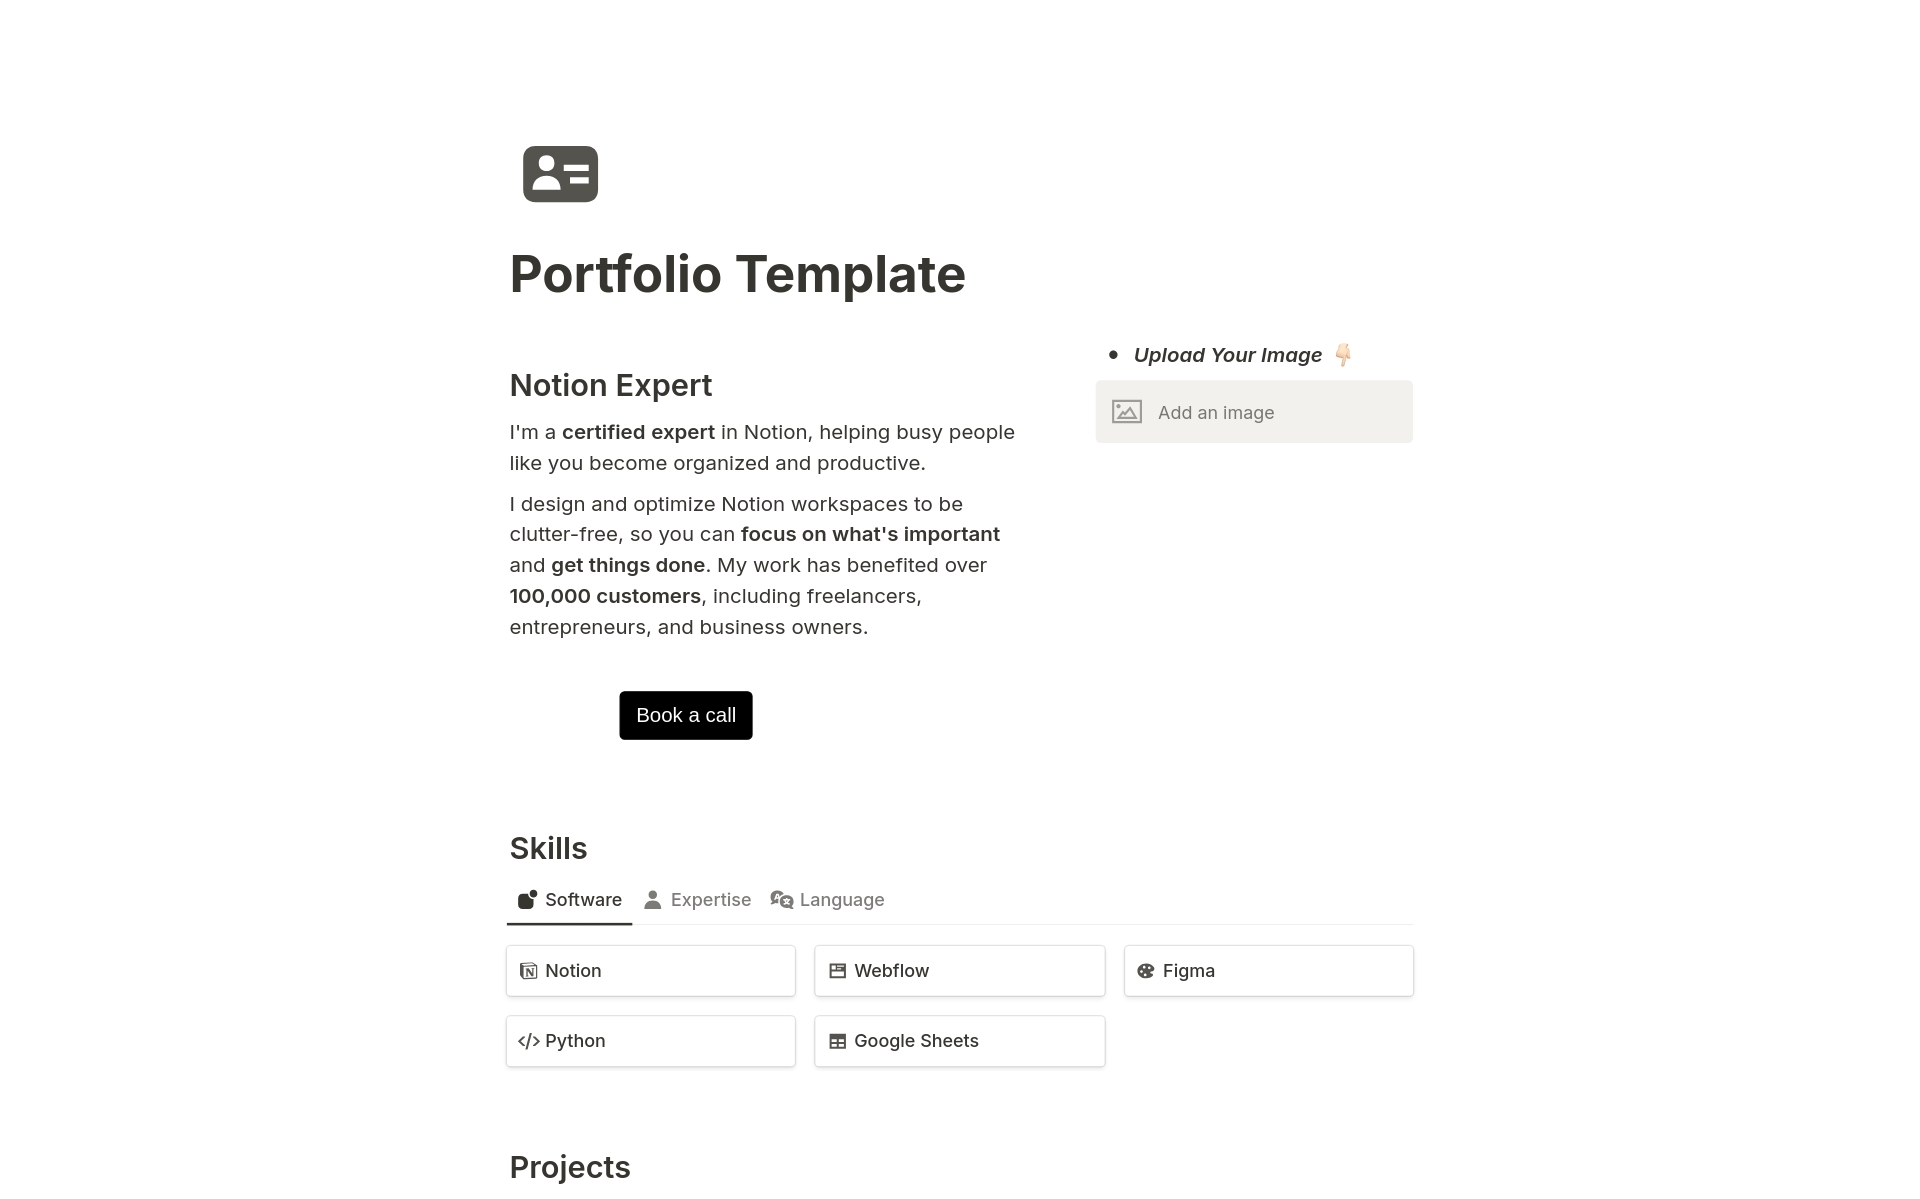 Tired of struggling to present your freelance expertise?

This Notion template is your one-stop shop for creating a stunning and professional portfolio that impresses potential clients.